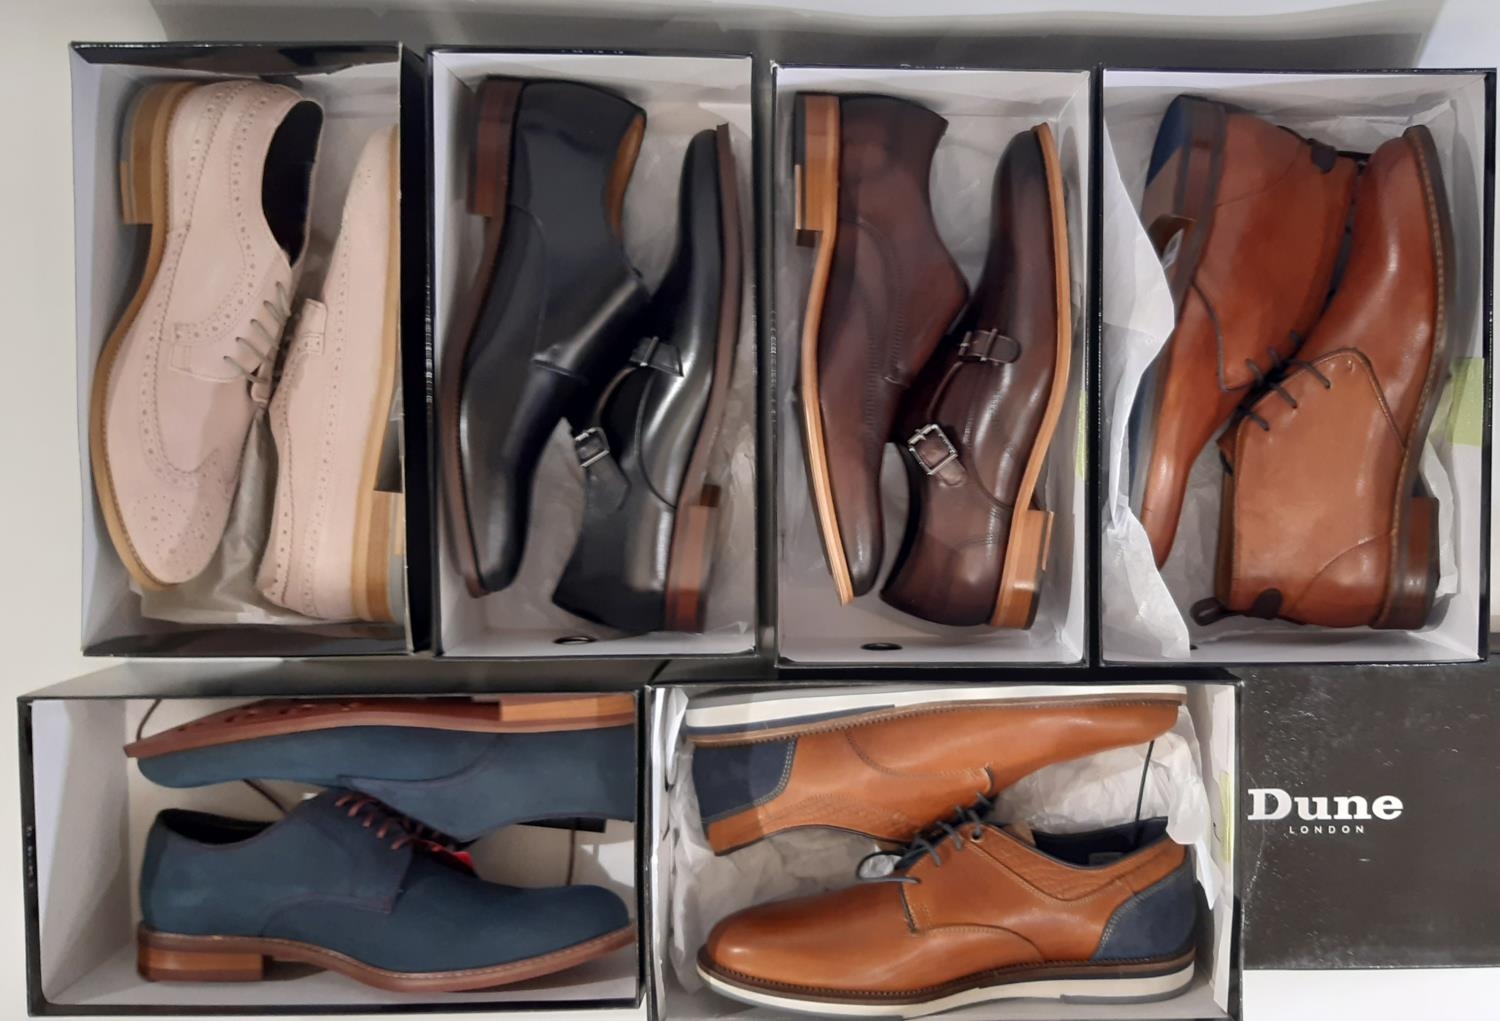 6 pairs of men's brogue shoes and boots by Dune, all size 9, boxed and appear unworn - Image 3 of 3